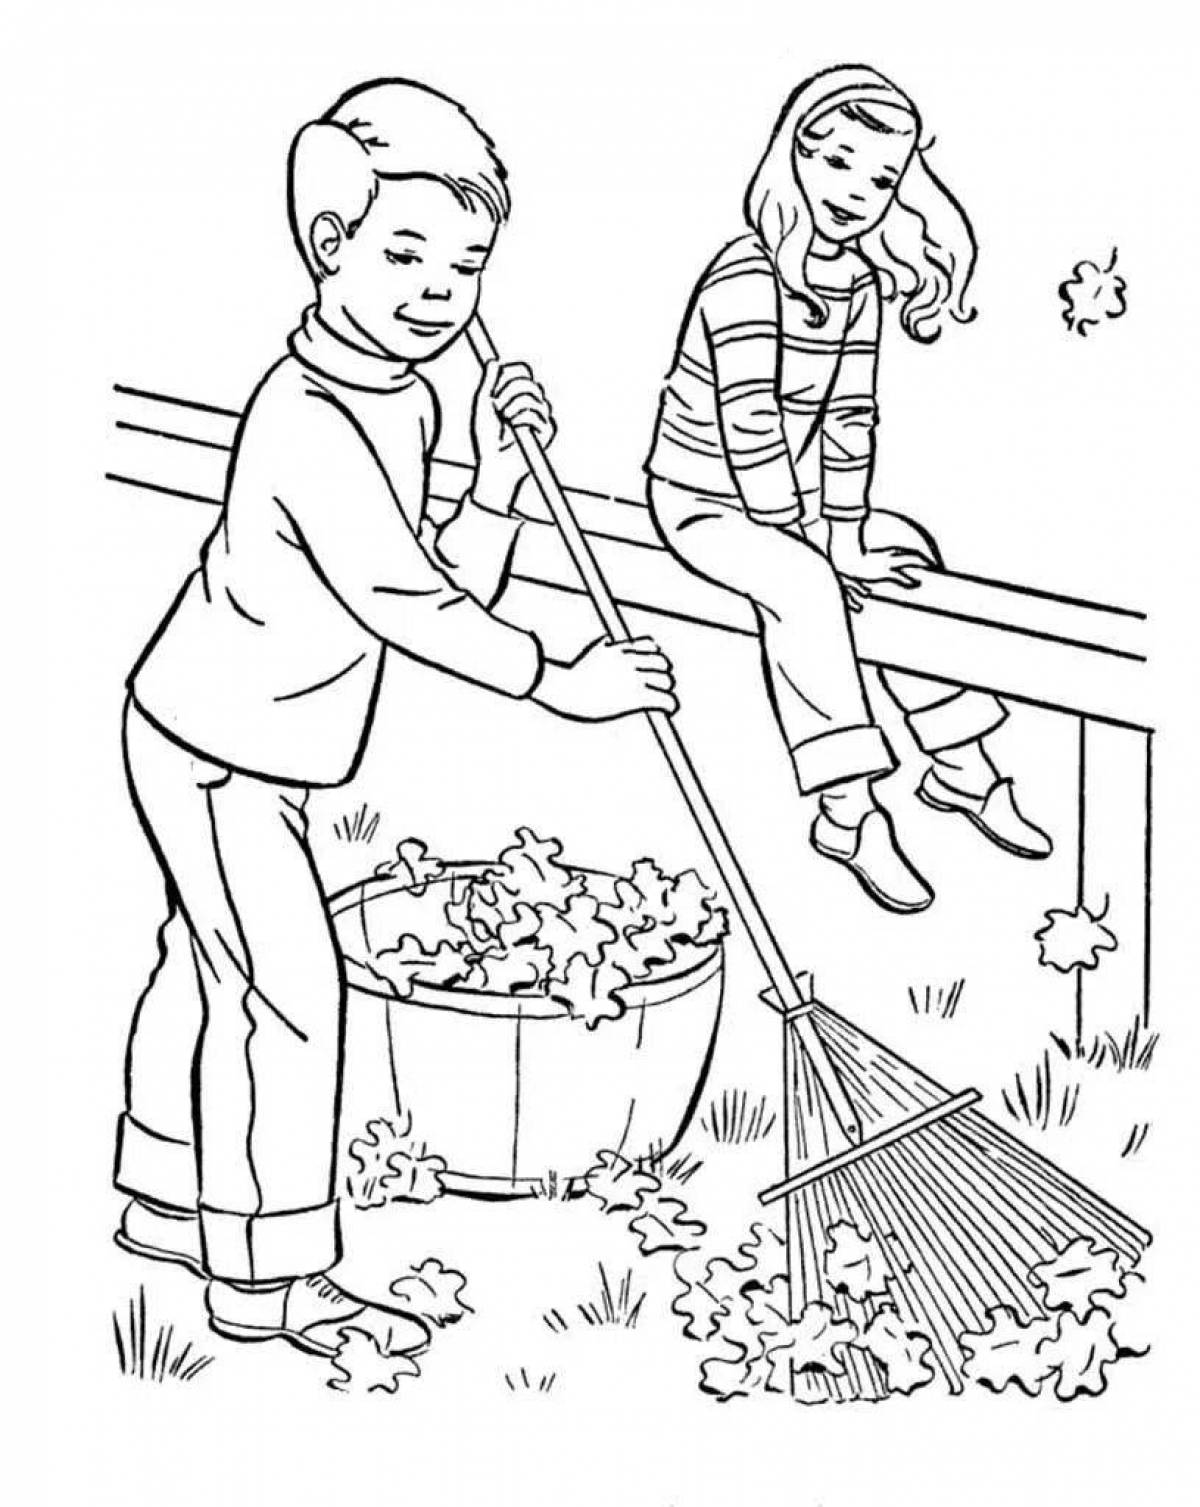 Fun coloring book to help parents